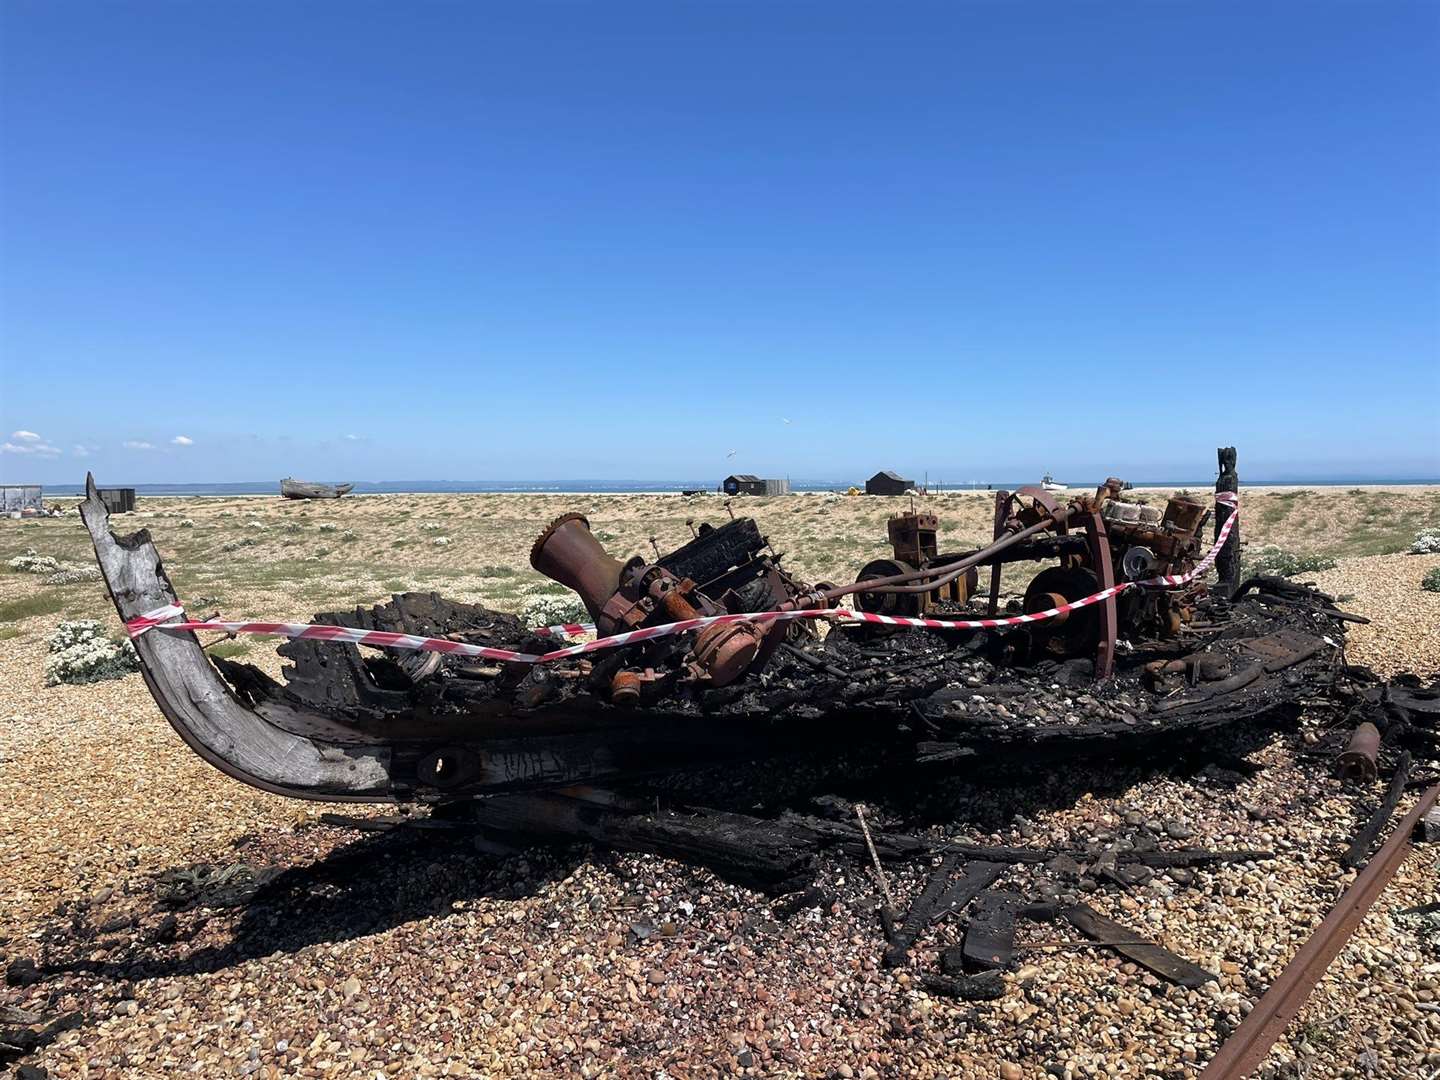 A boat was destroyed by fire on the beach at Dungeness. Photo: Susan Pilcher